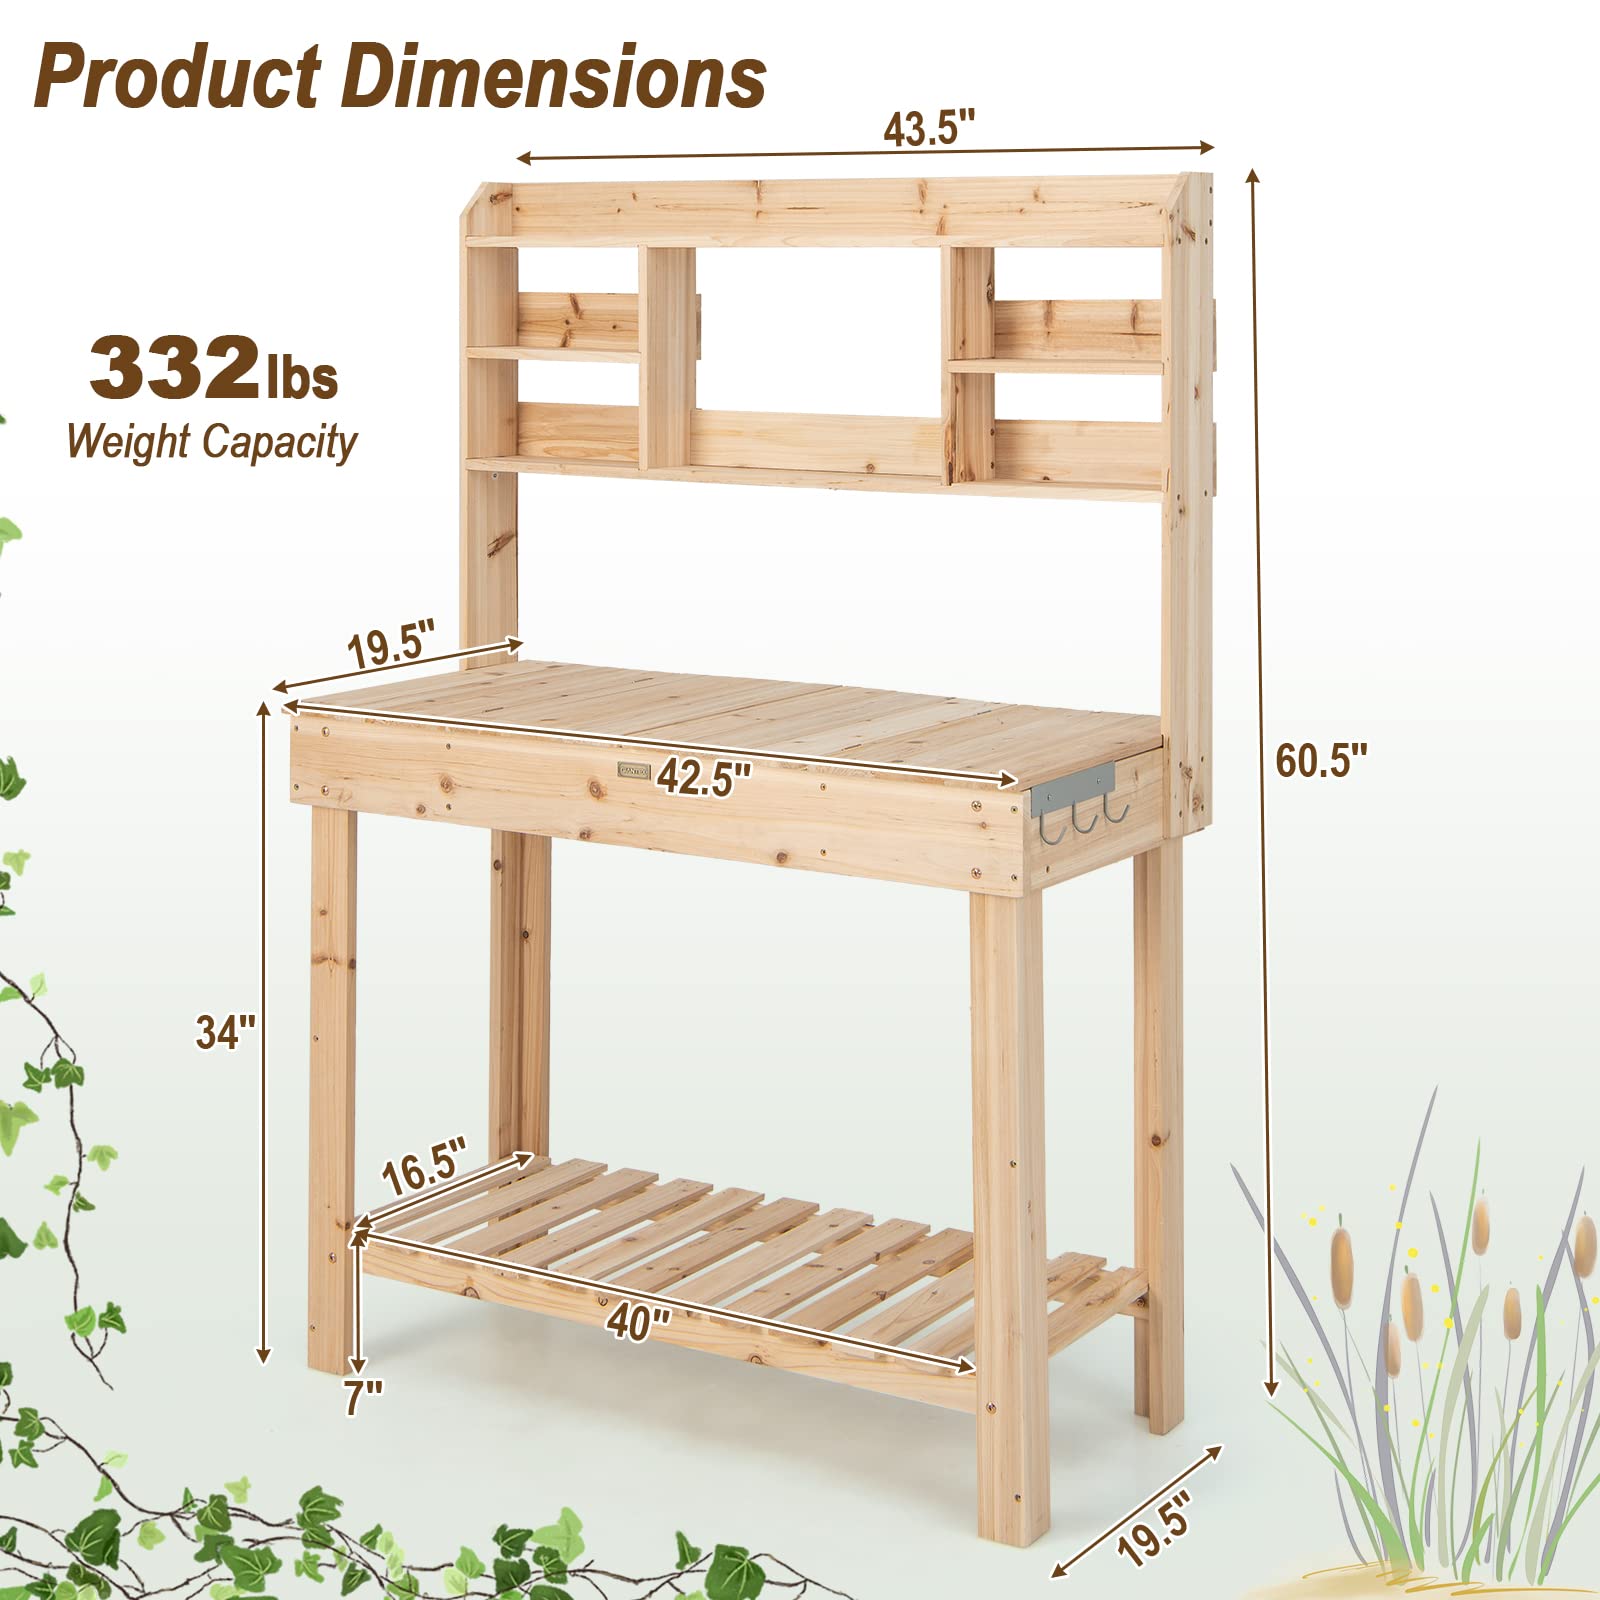 Giantex Garden Potting Bench Table, Large Workbench Table with Shelves, 43.5"x19.5"x 60.5"